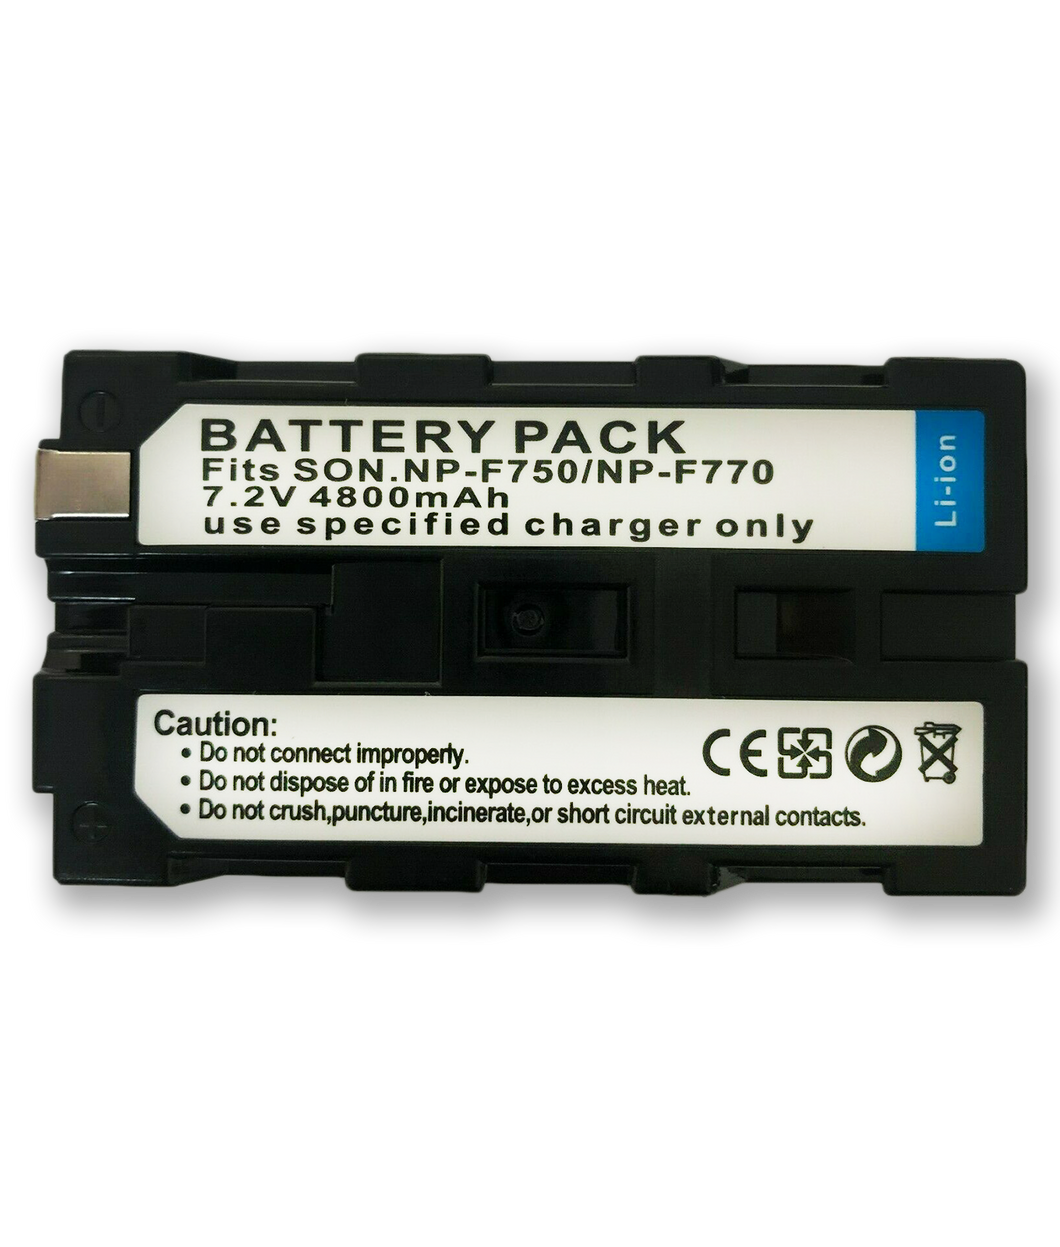 Replacement Battery For Sony AX1 AX2000 FX1 FX7 PD150 VX2100 NP-F970 NP-F960 7200mAh